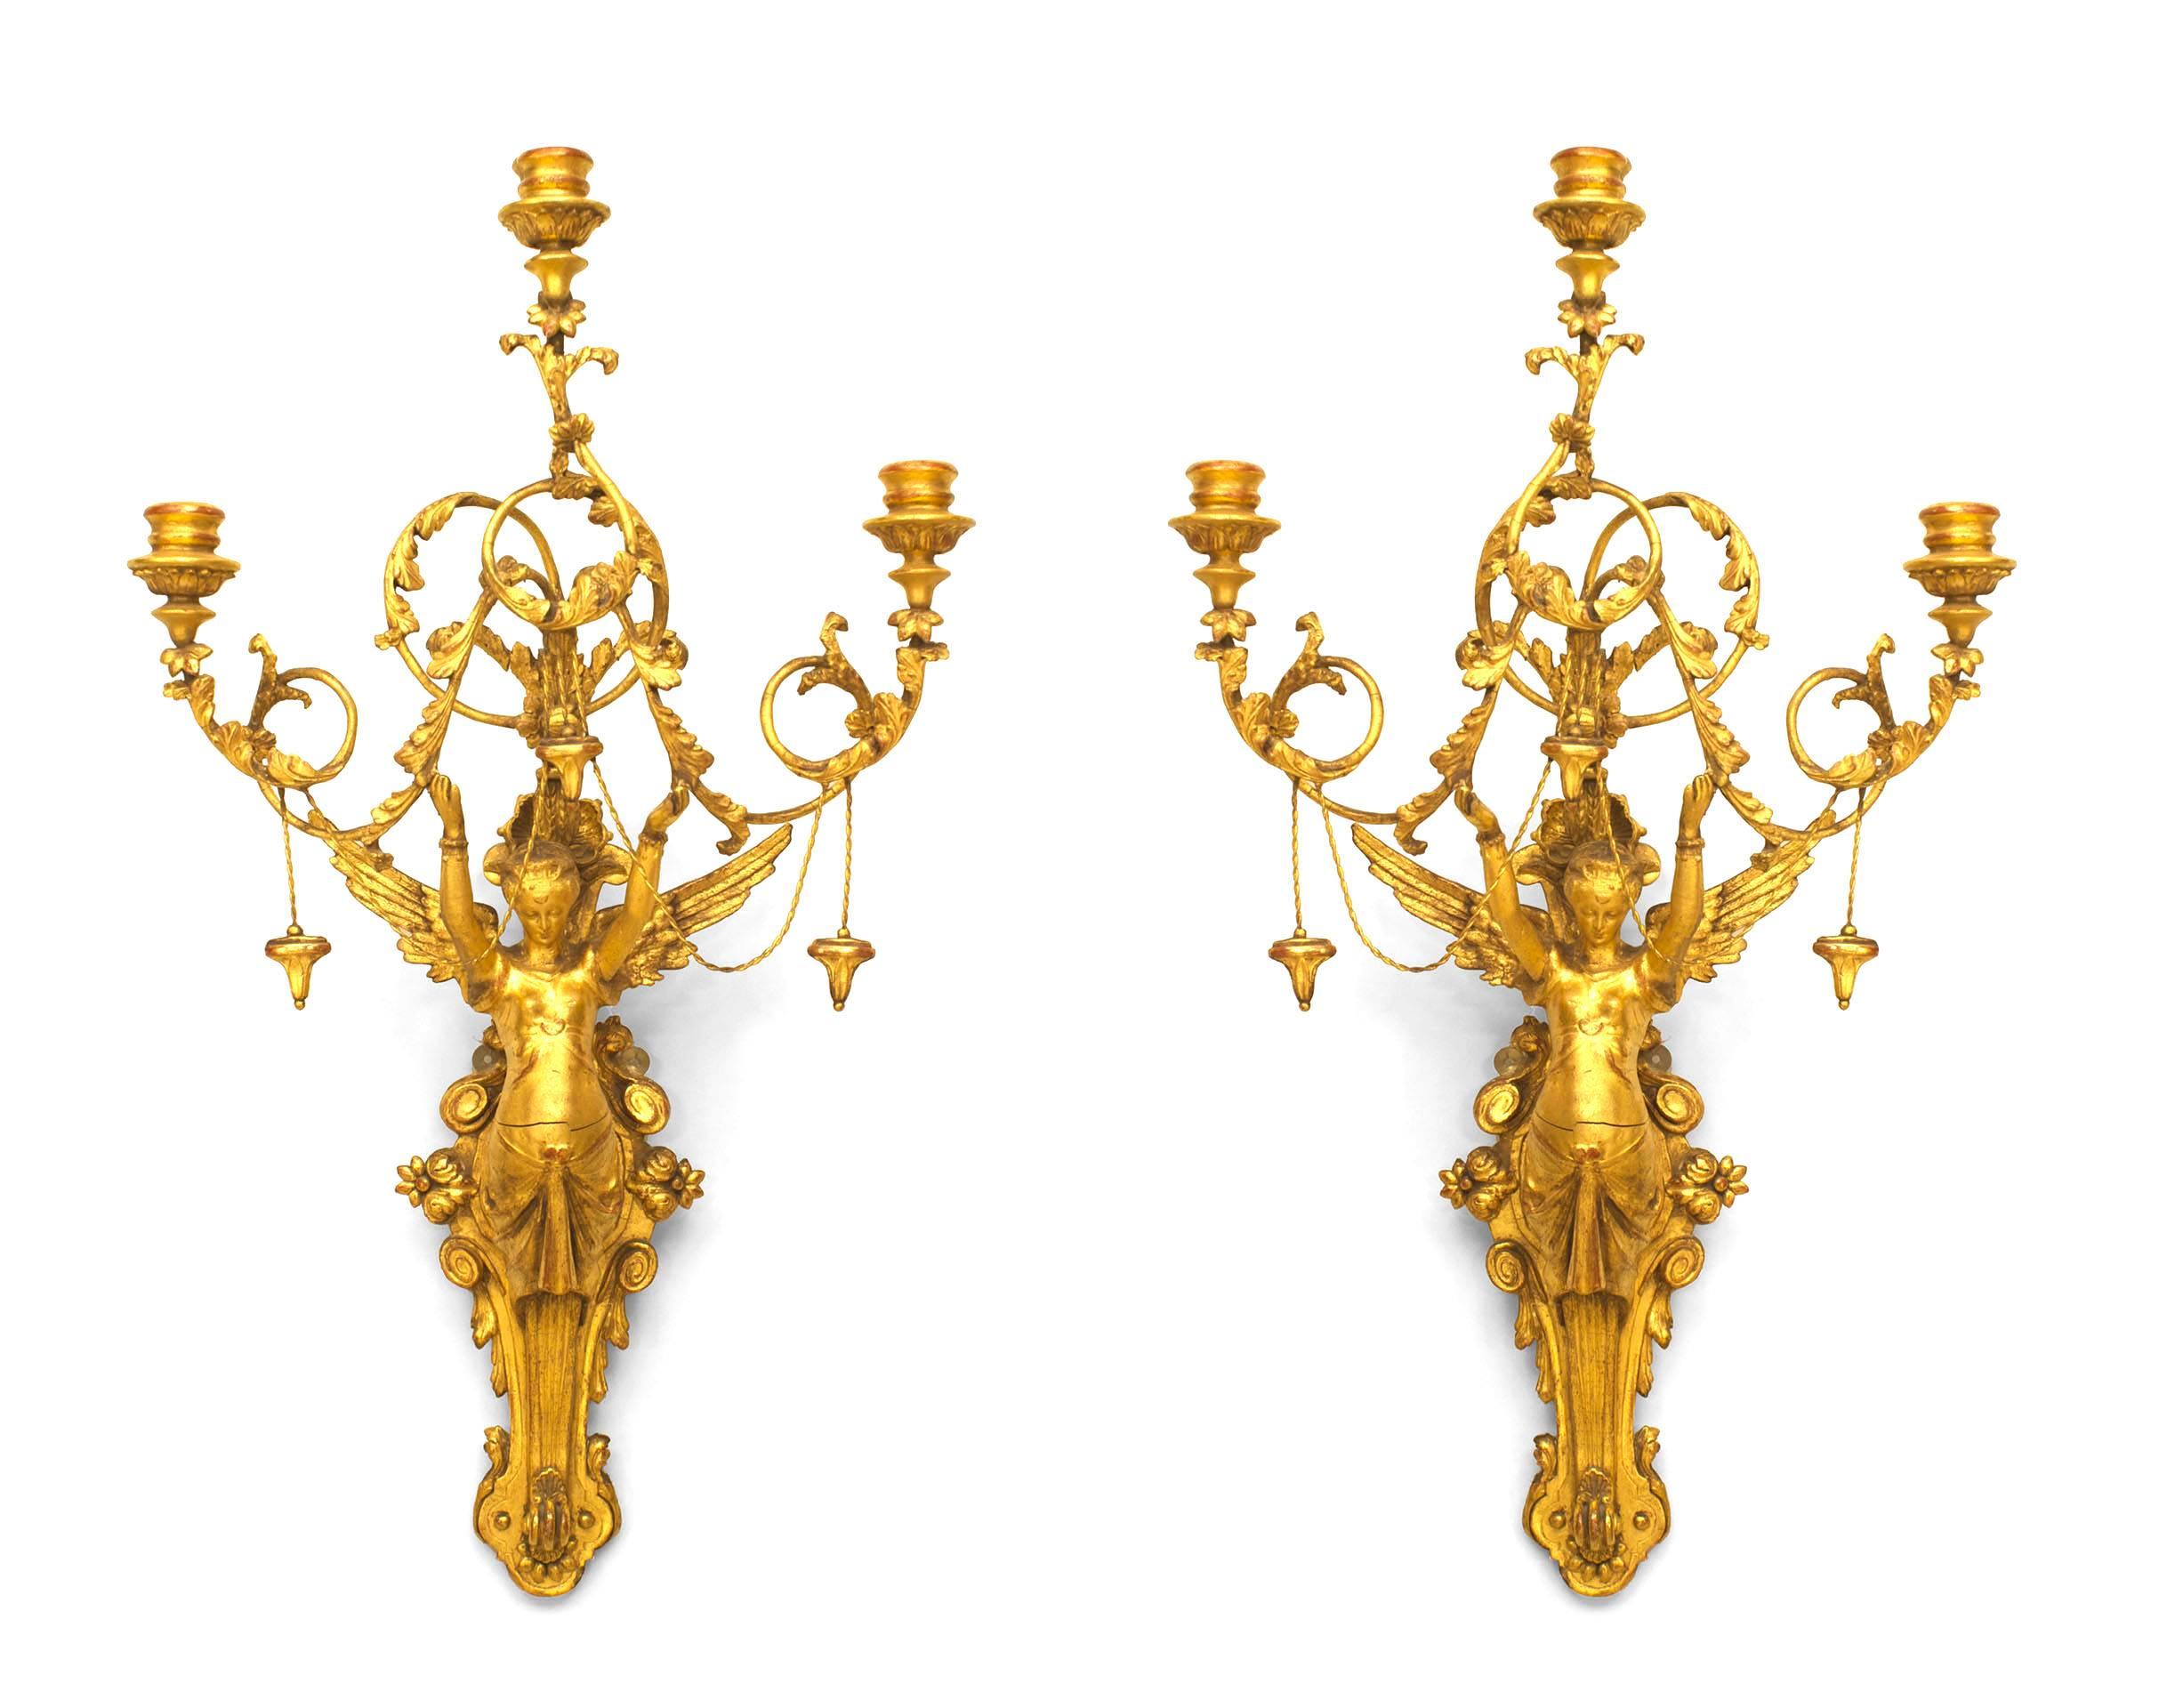 Pair of Italian Neo-Classic Empire (1st Quarter 19th Century) gilt wood 3 light wall sconces with centered classical winged female figure with scrolls and tassel trim. (PRICED AS Pair)
